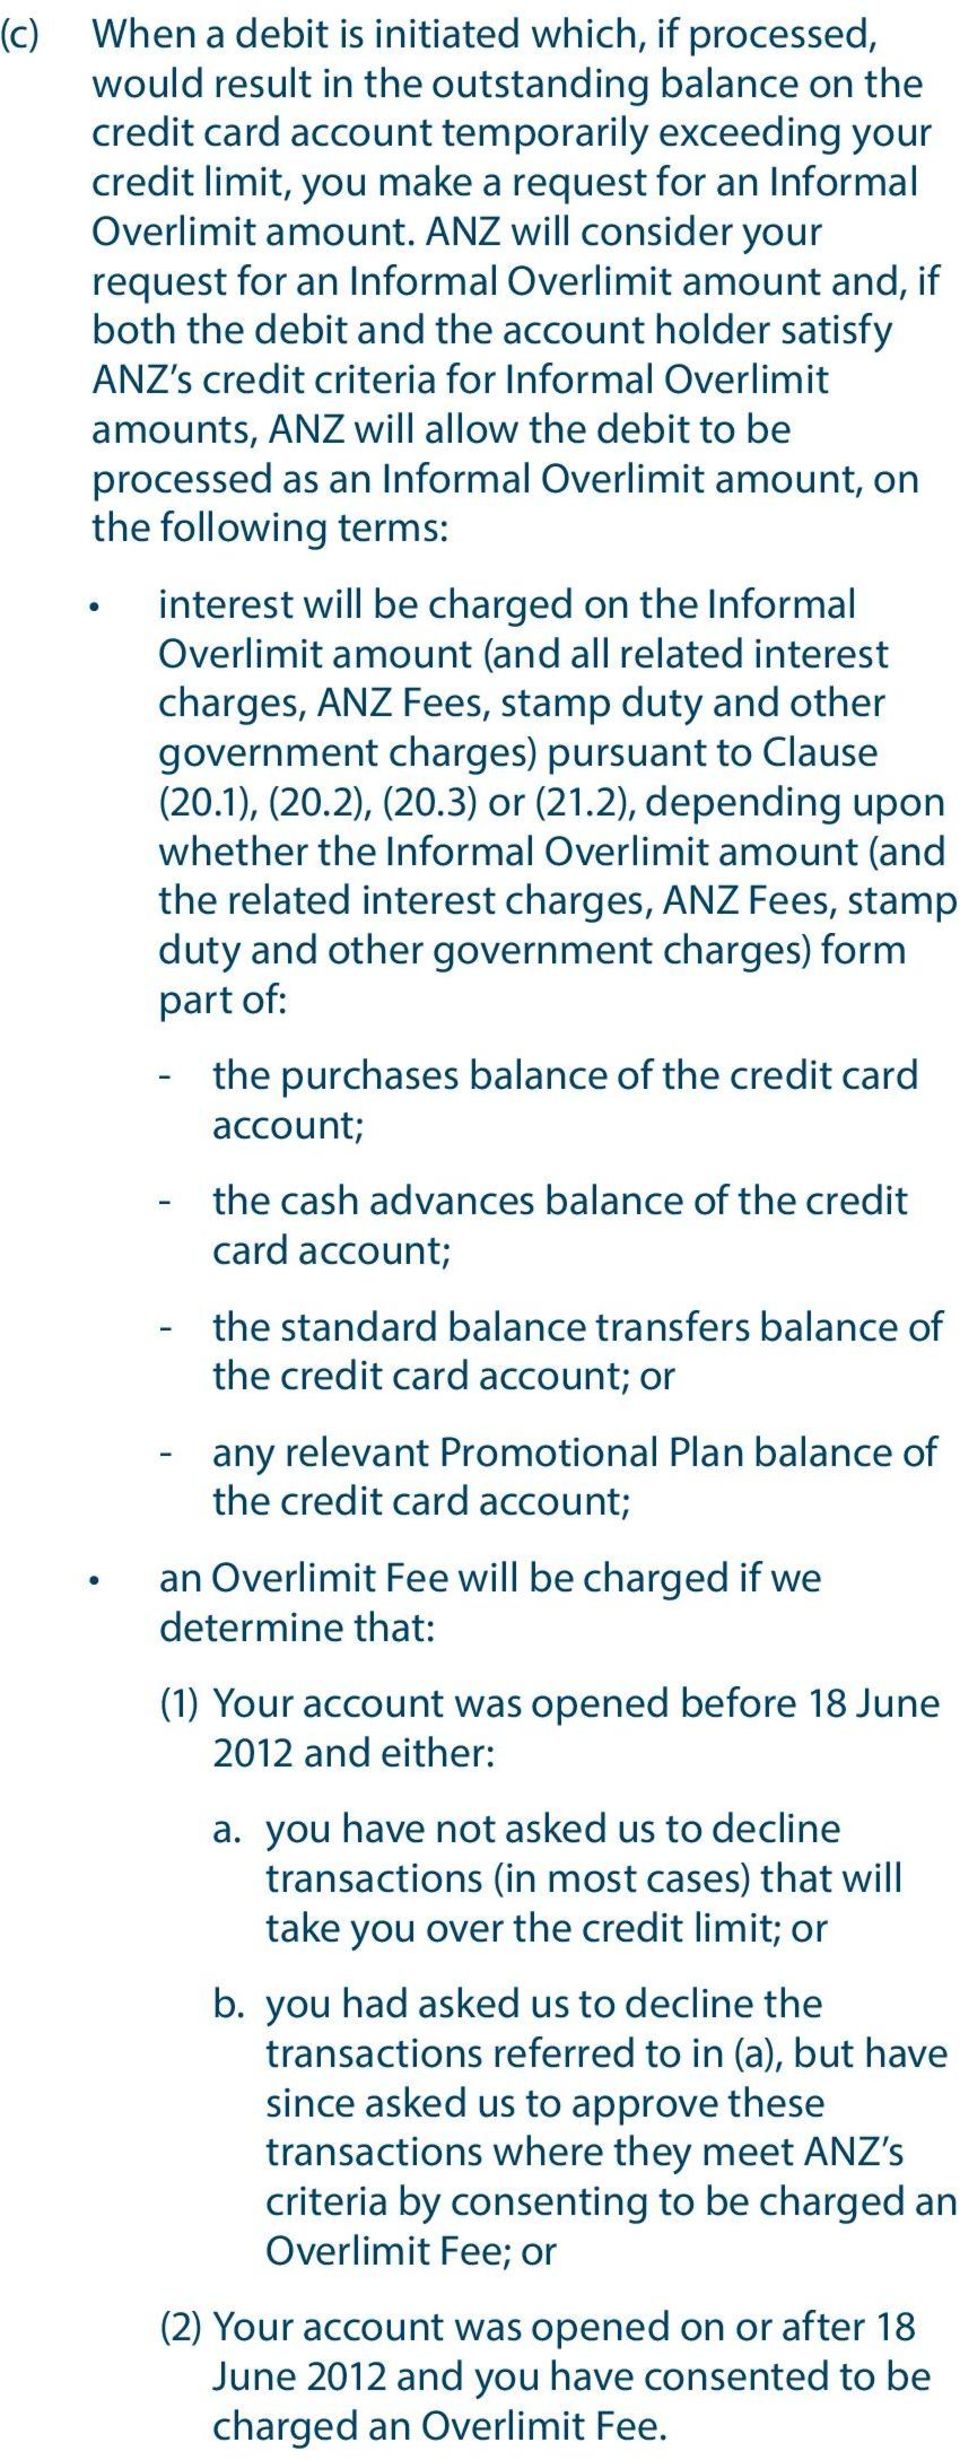 ANZ will consider your request for an Informal Overlimit amount and, if both the debit and the account holder satisfy ANZ s credit criteria for Informal Overlimit amounts, ANZ will allow the debit to